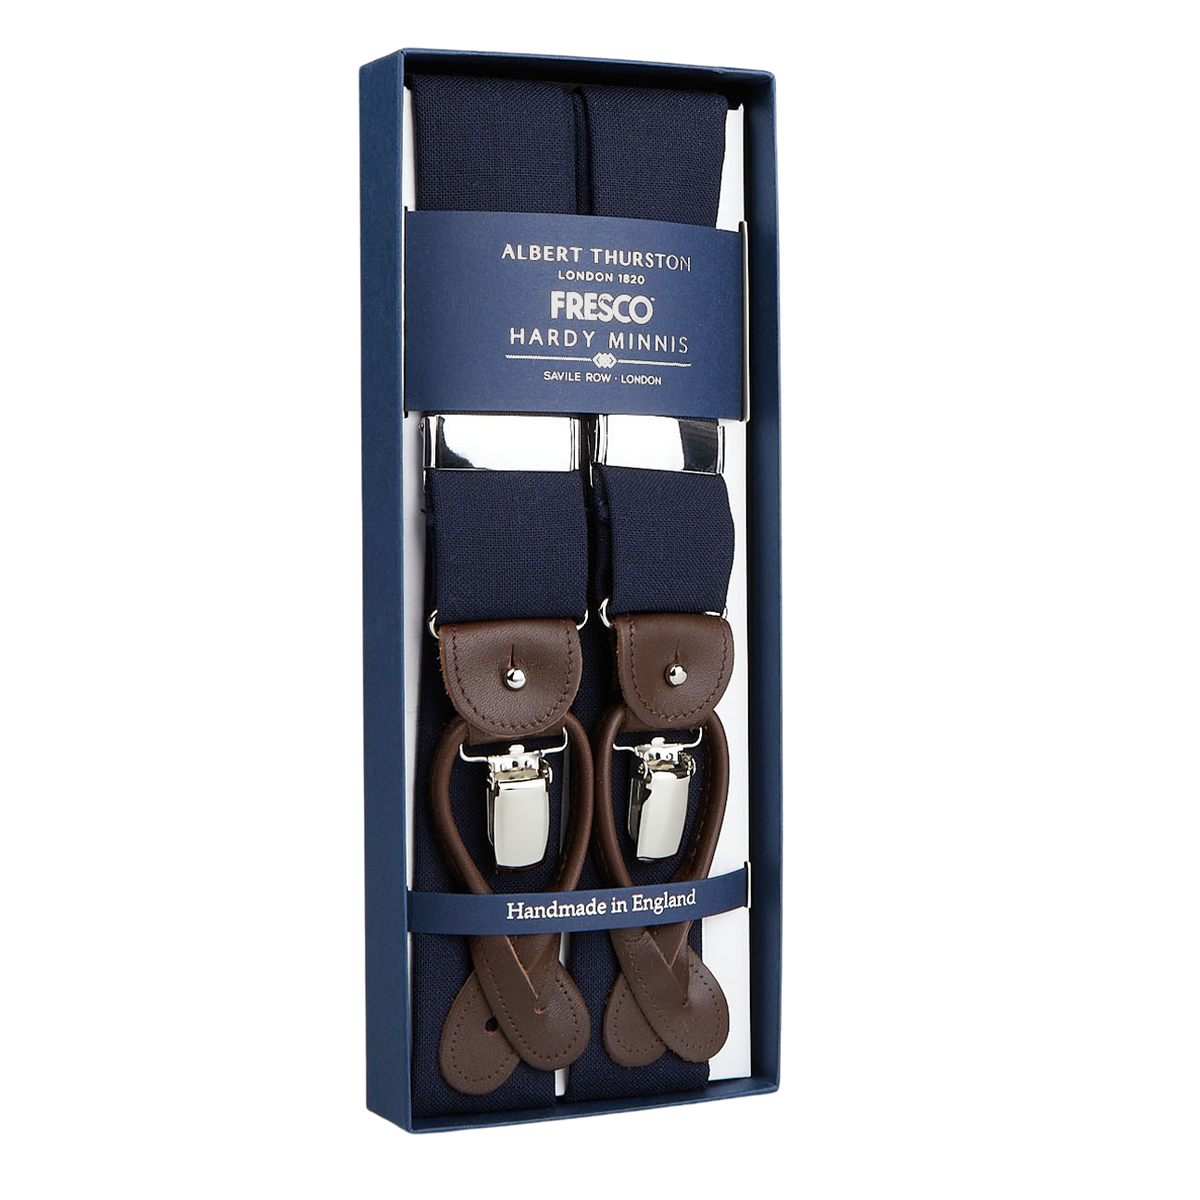 A pair of Albert Thurston Navy Wool Fresco Leather 35 mm Braces, presented in a package, with the label "handmade in England".